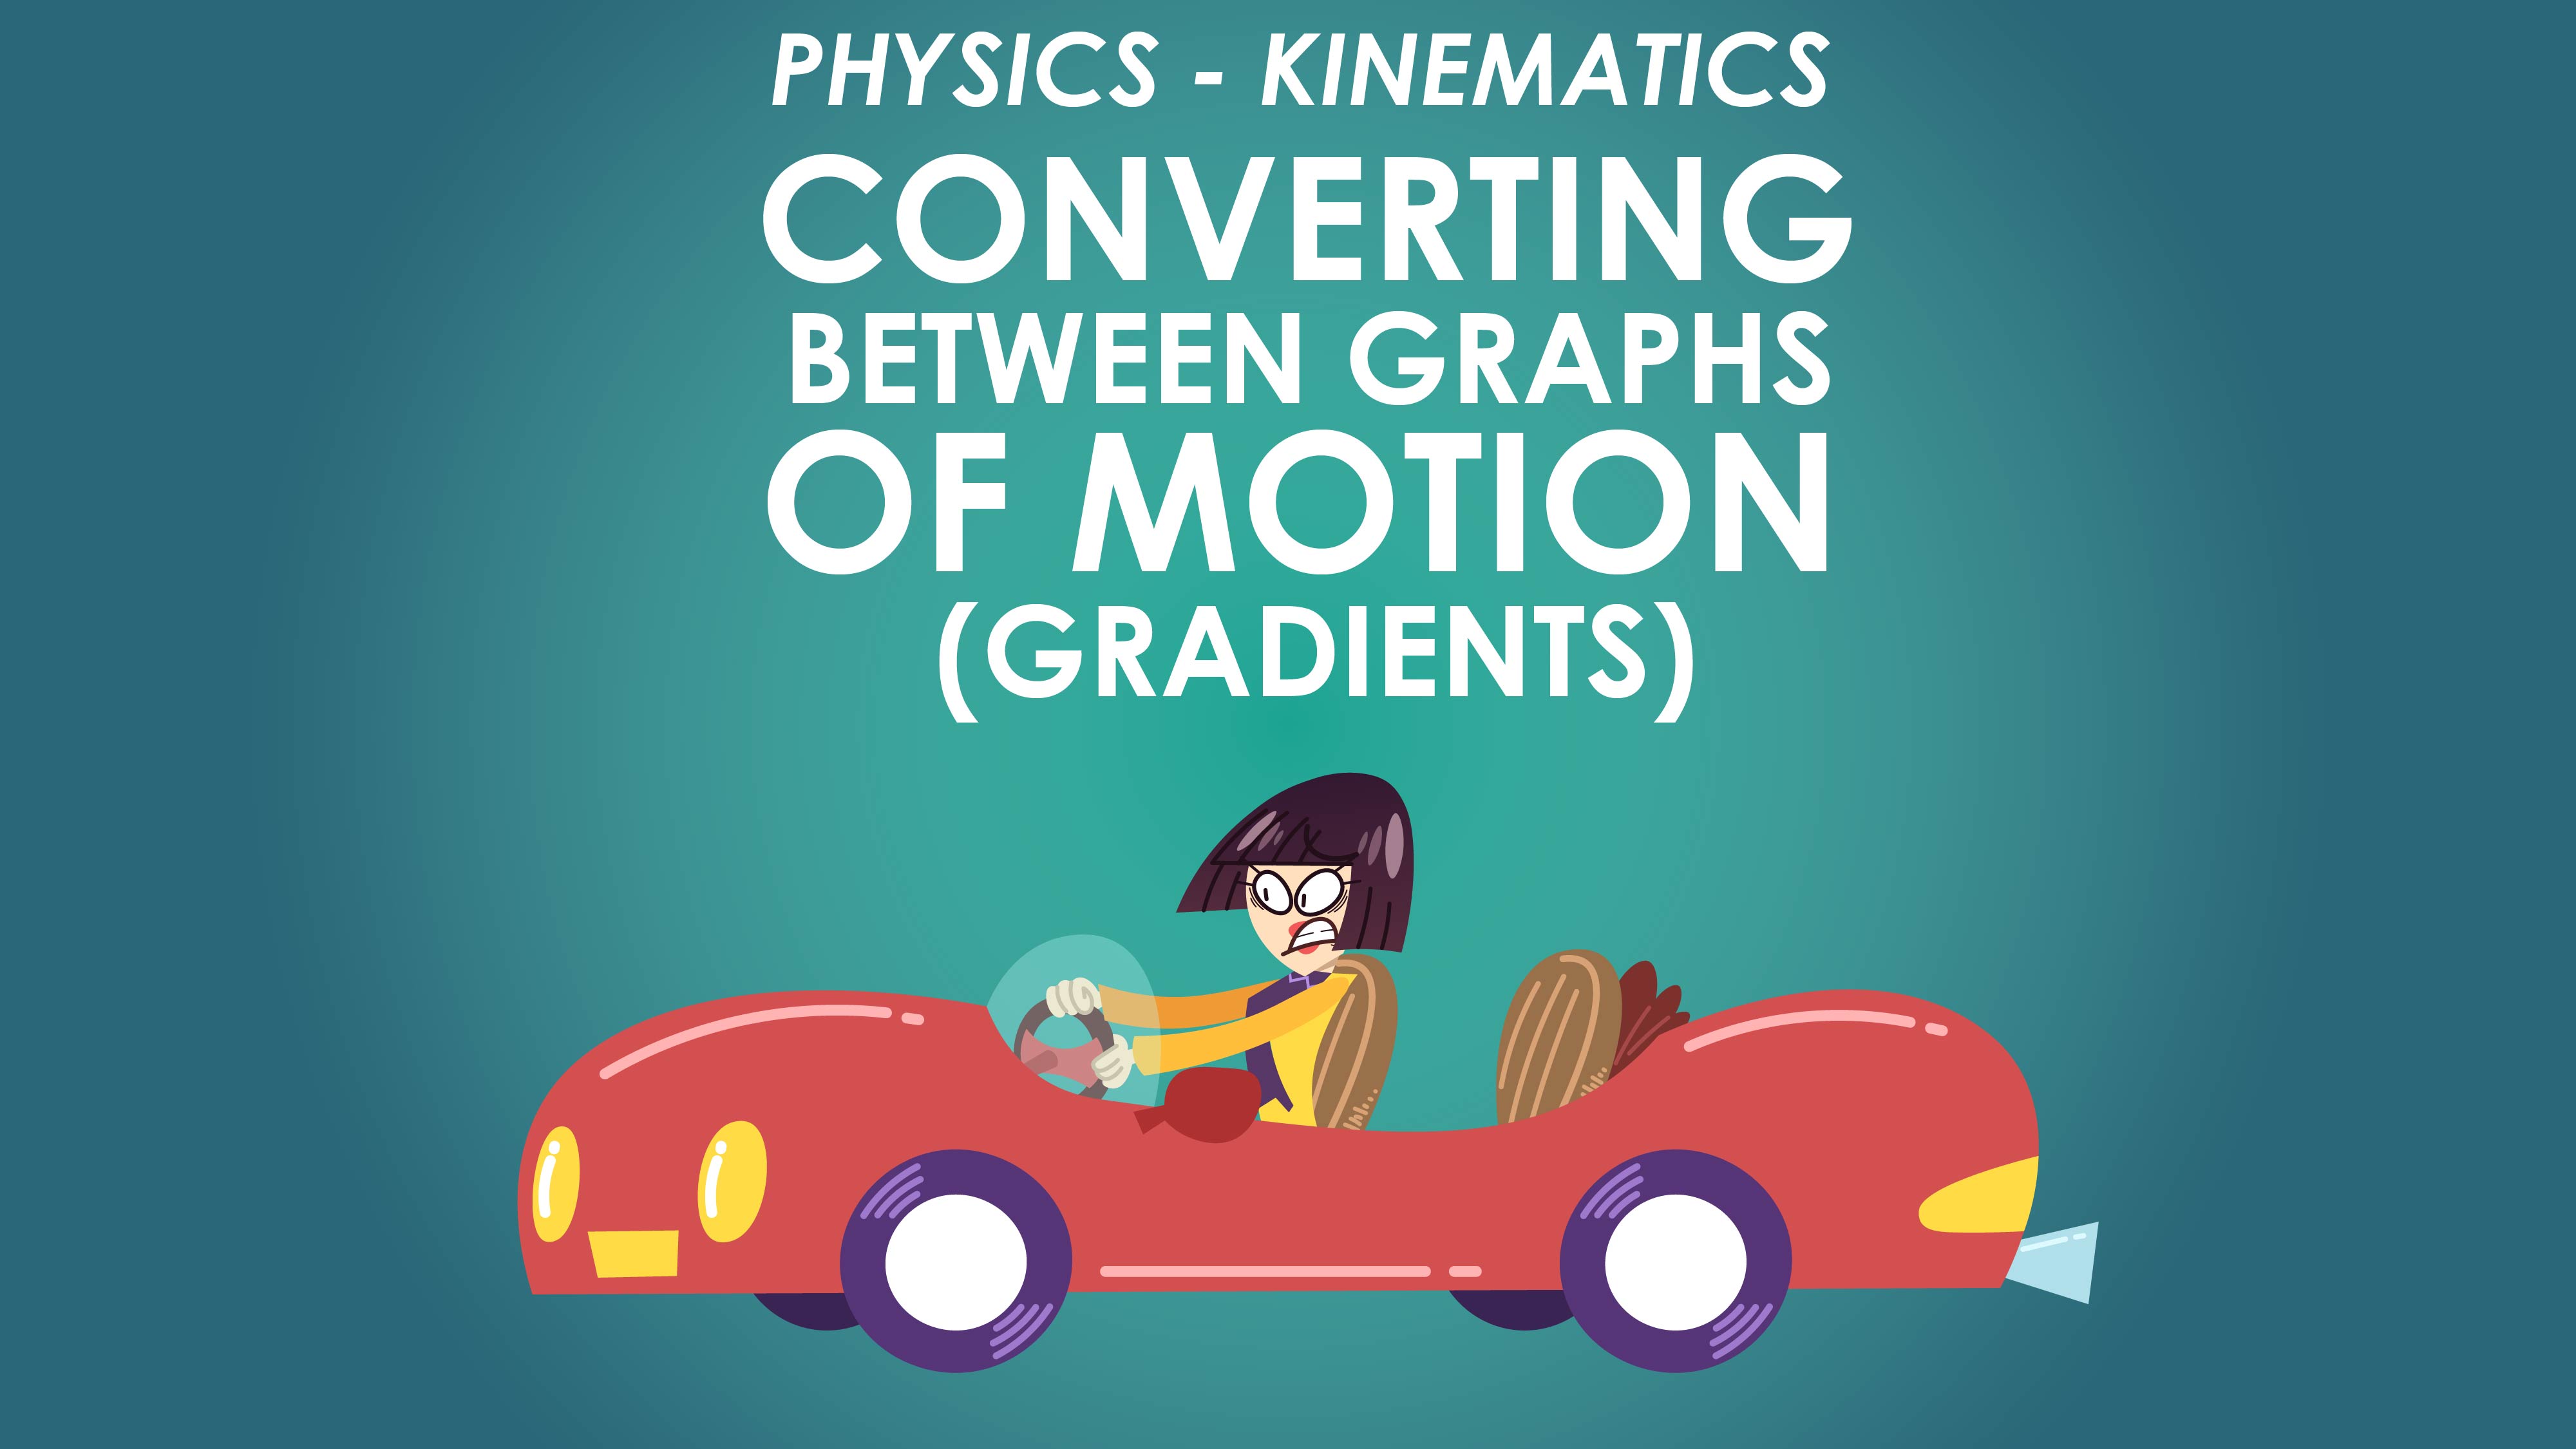 Converting Between Graphs of Motion 1 - Motion in a Straight Line